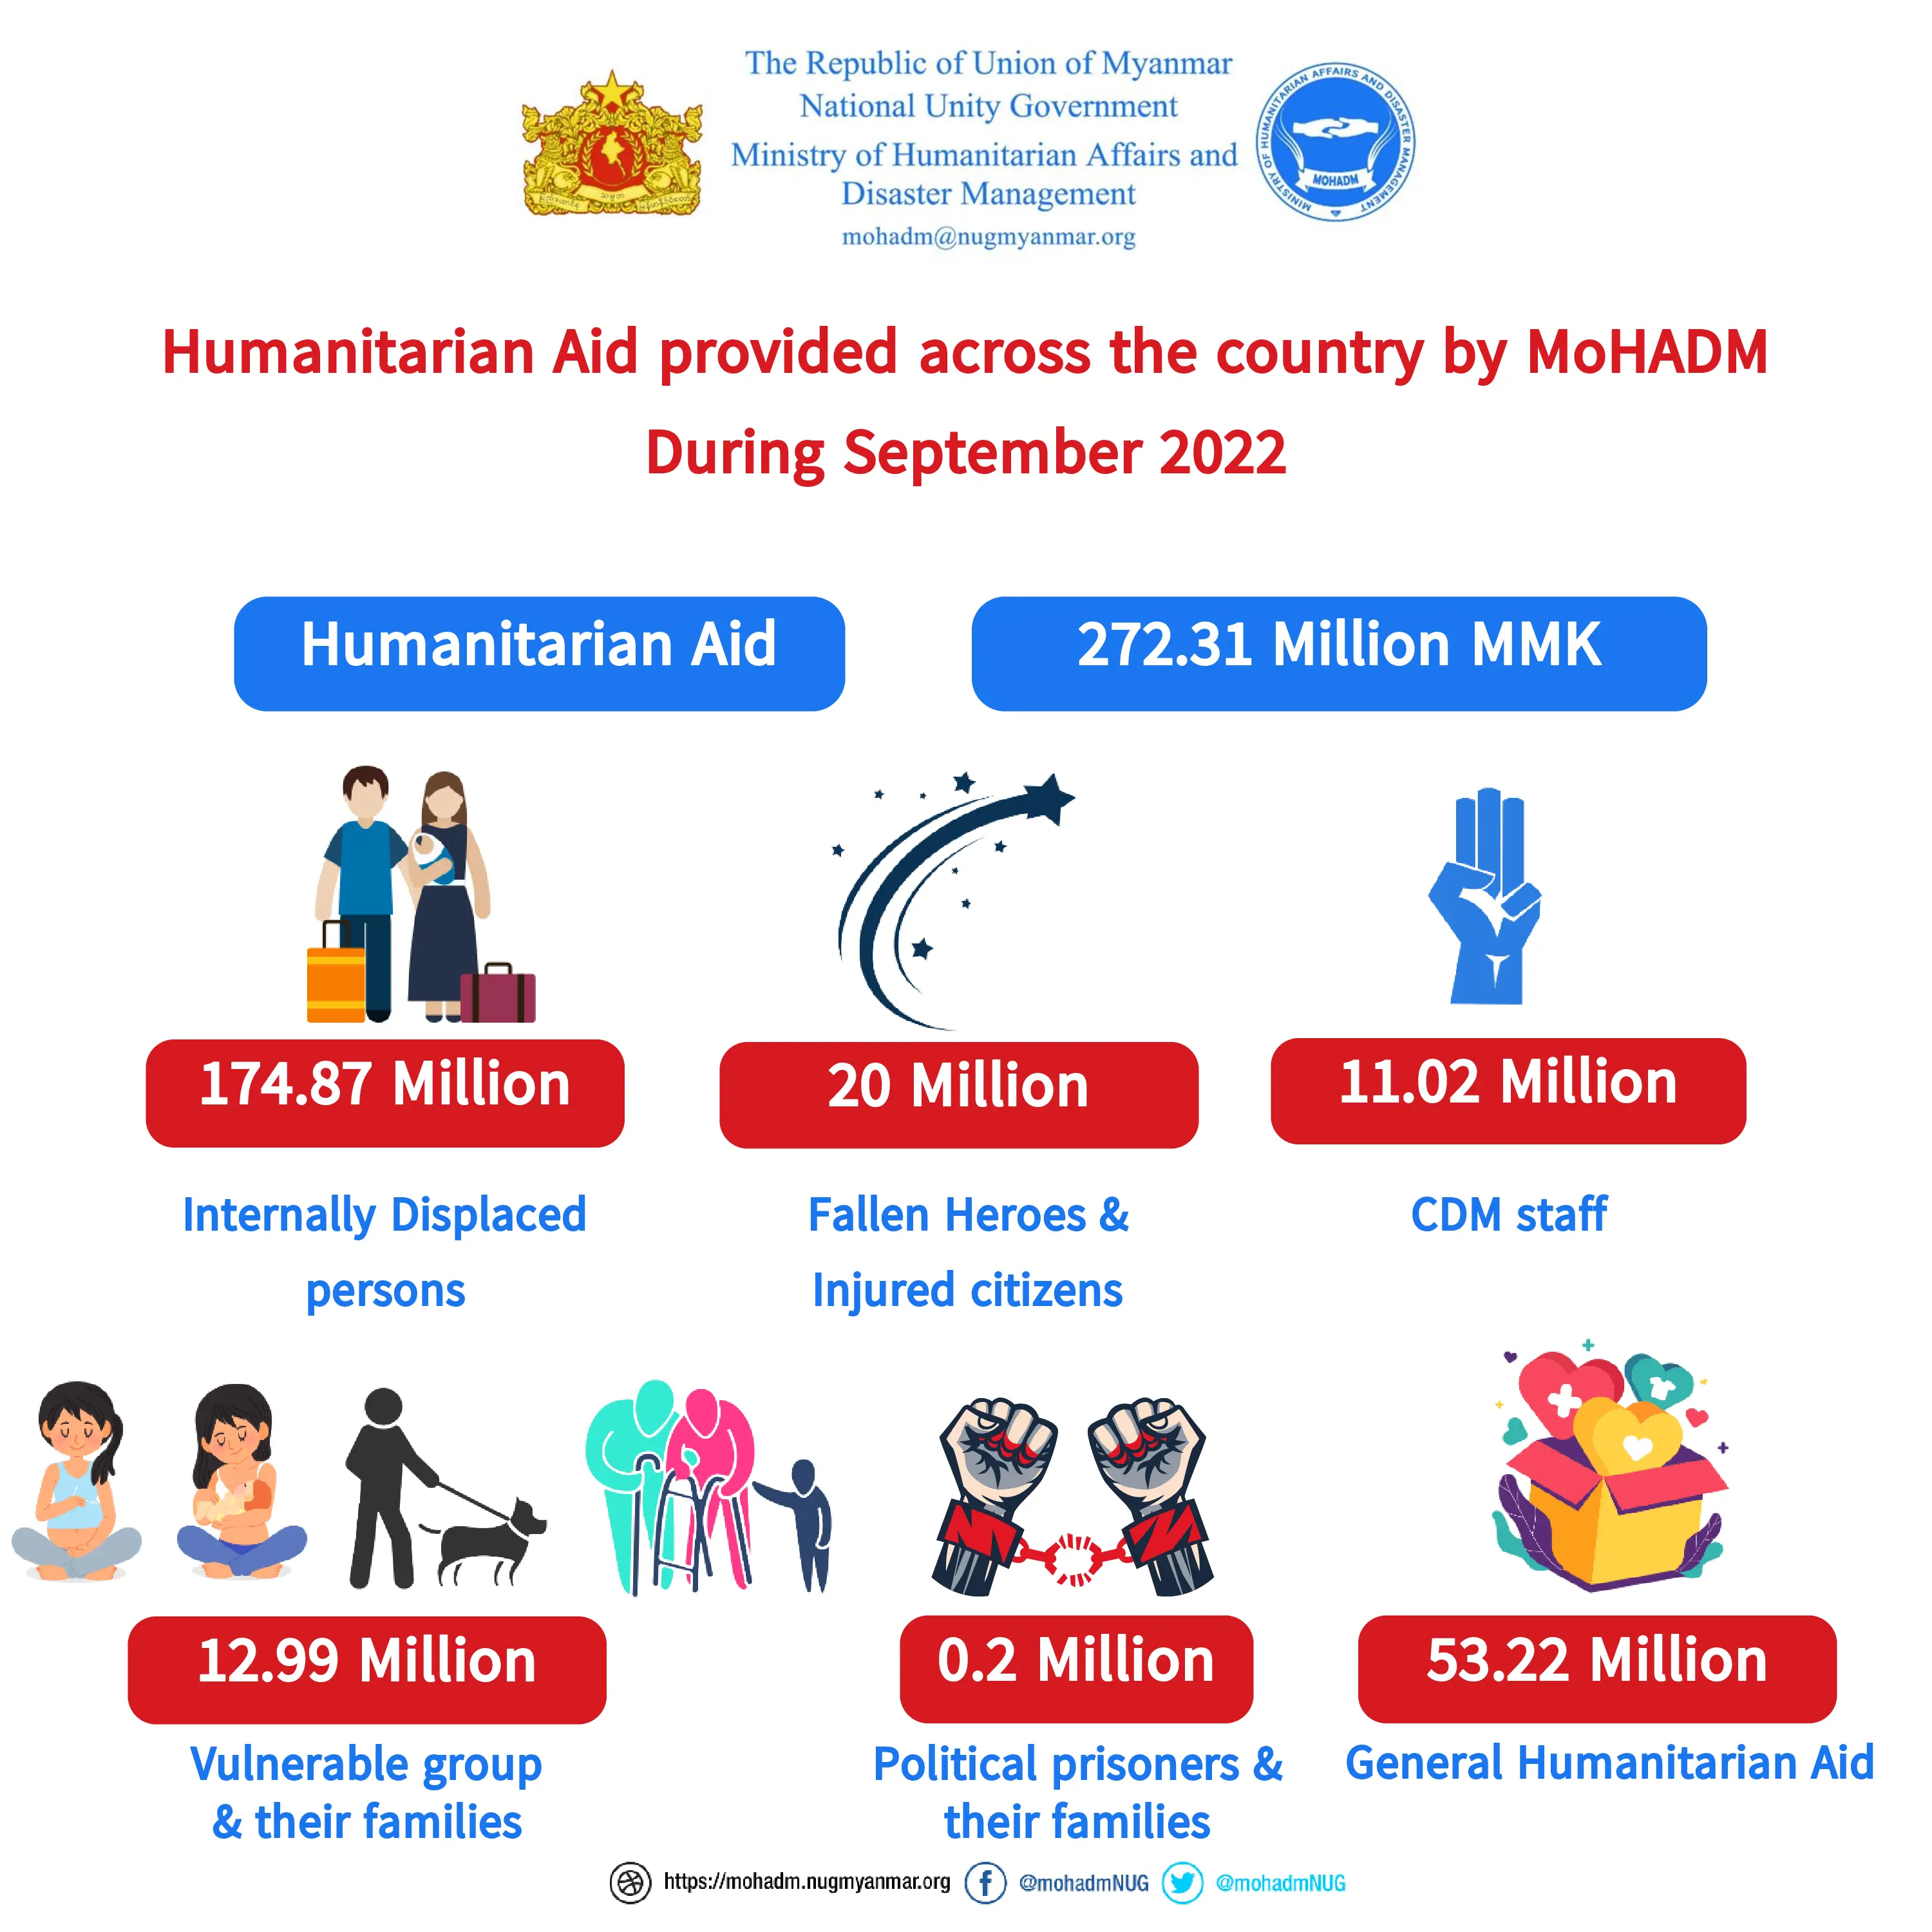 Summary of humanitarian aid provision by MoHADM (September 2022)